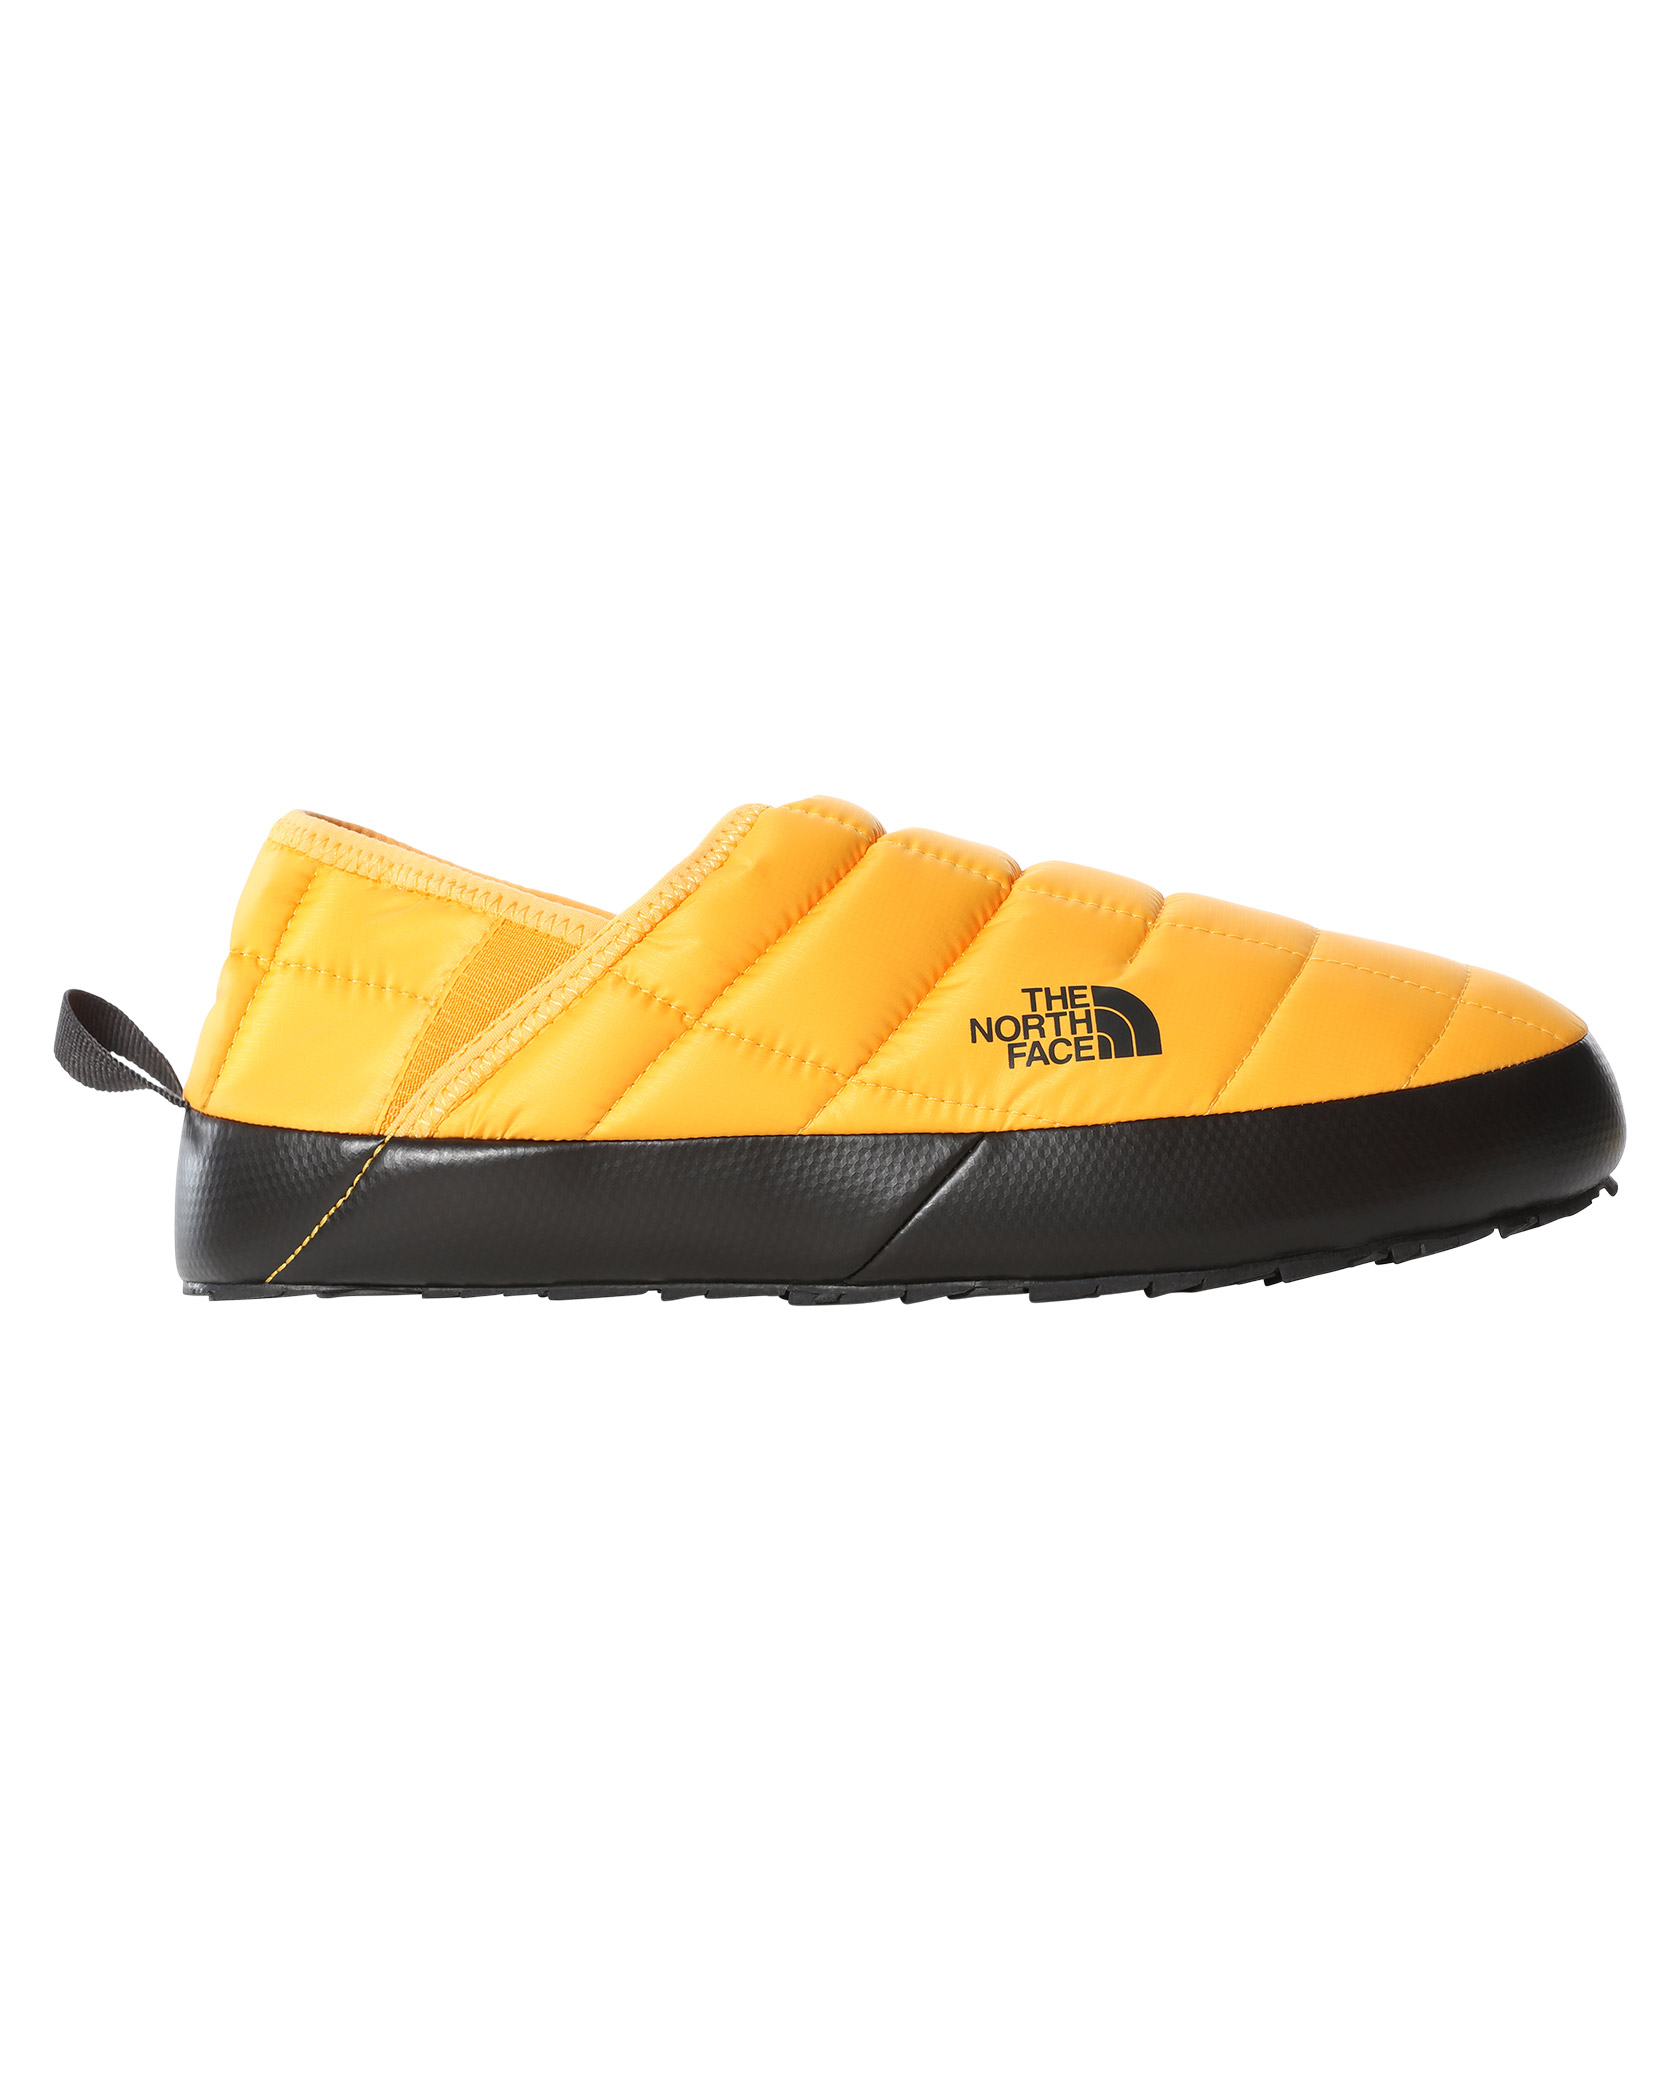 The North Face Thermoball Traction Mule V M Summit Gold/TNF Black (Storlek 9 US)